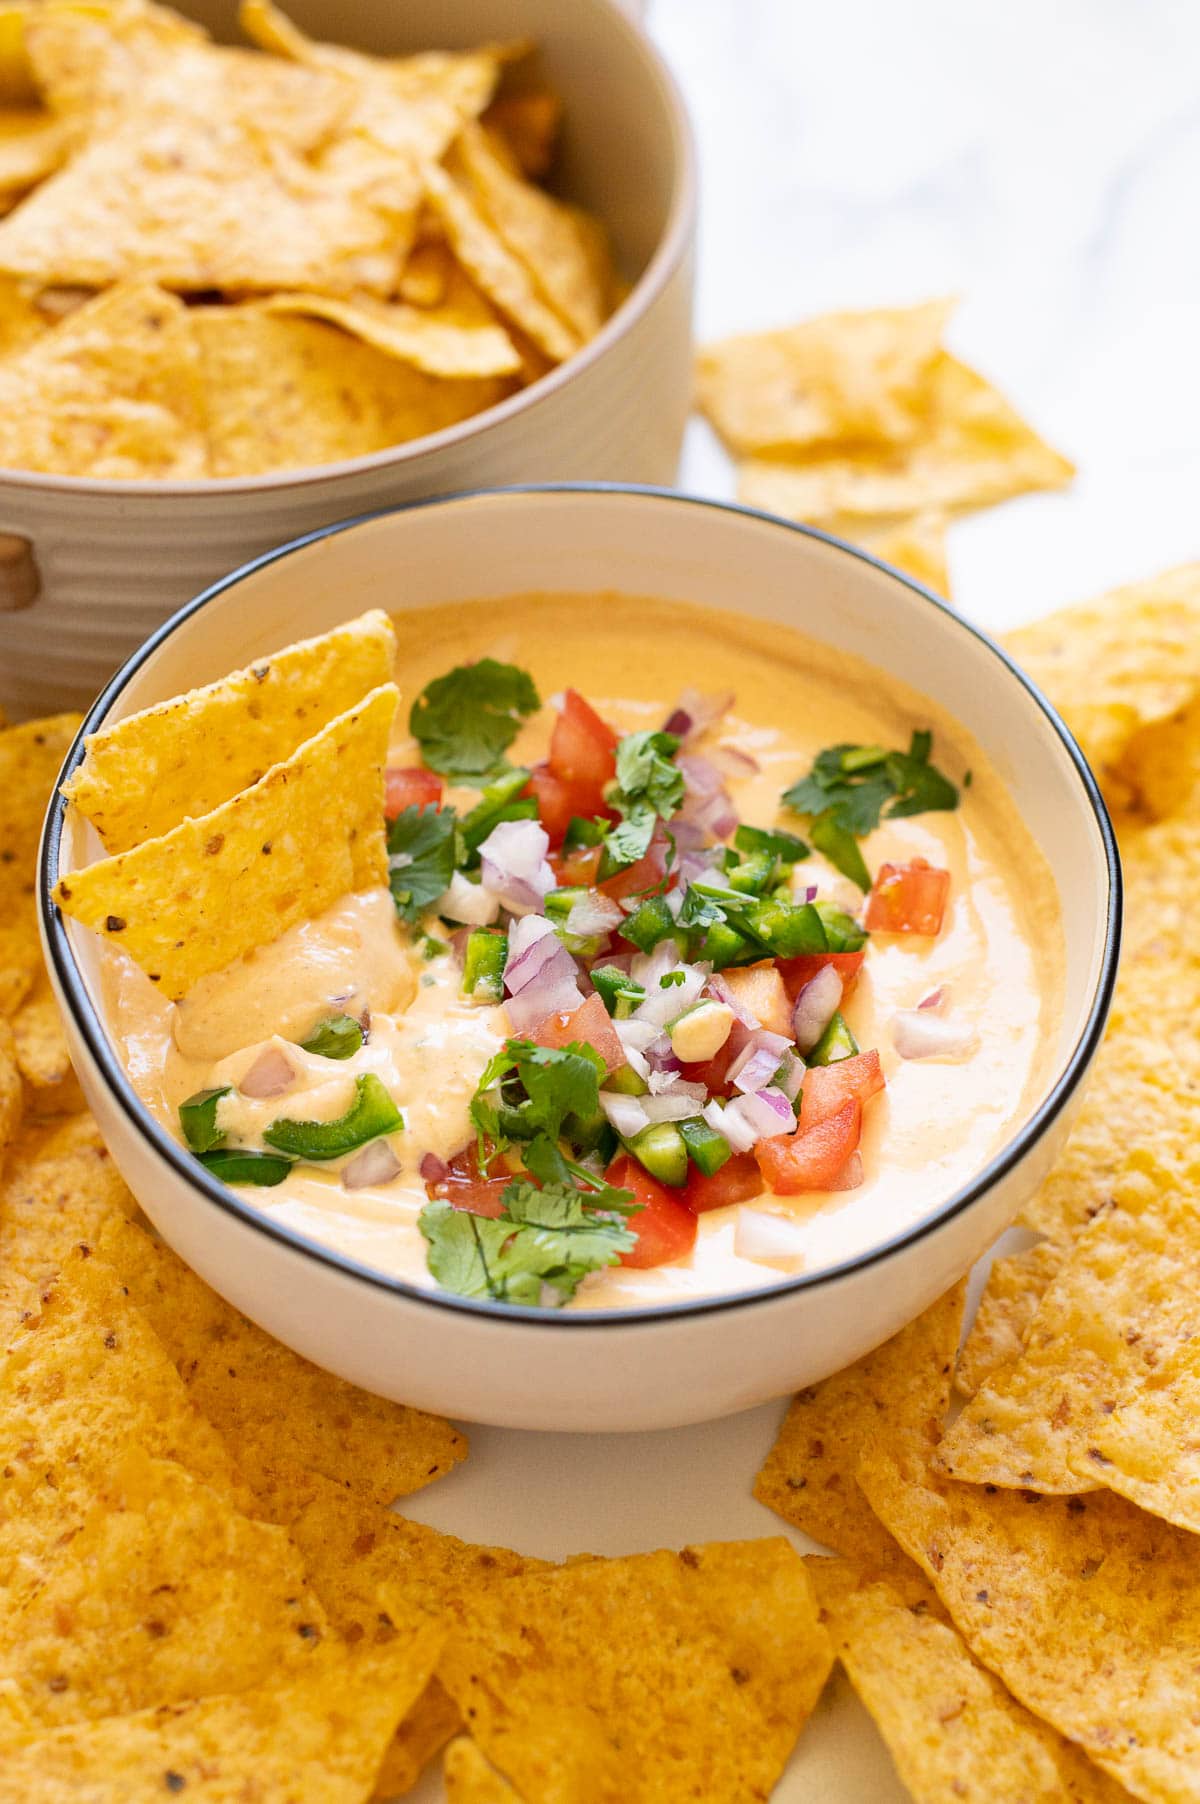 Cottage cheese queso dip with tomatoes, red onion, jalapeno and cilantro in a bowl with tortilla chips.